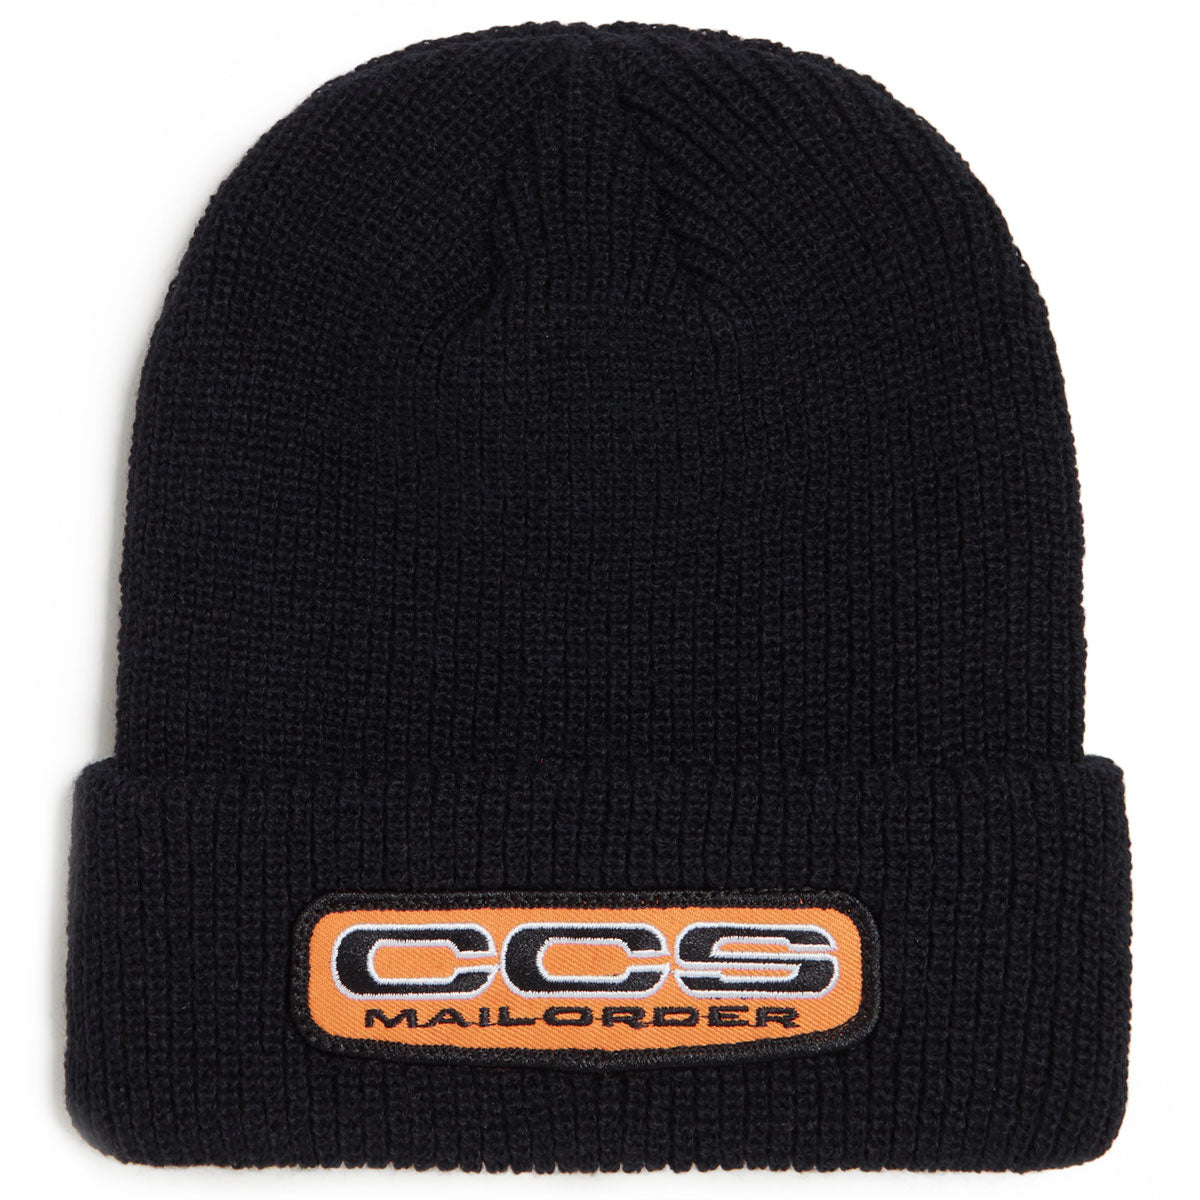 CCS Mailorder Patch Beanie - Black image 1